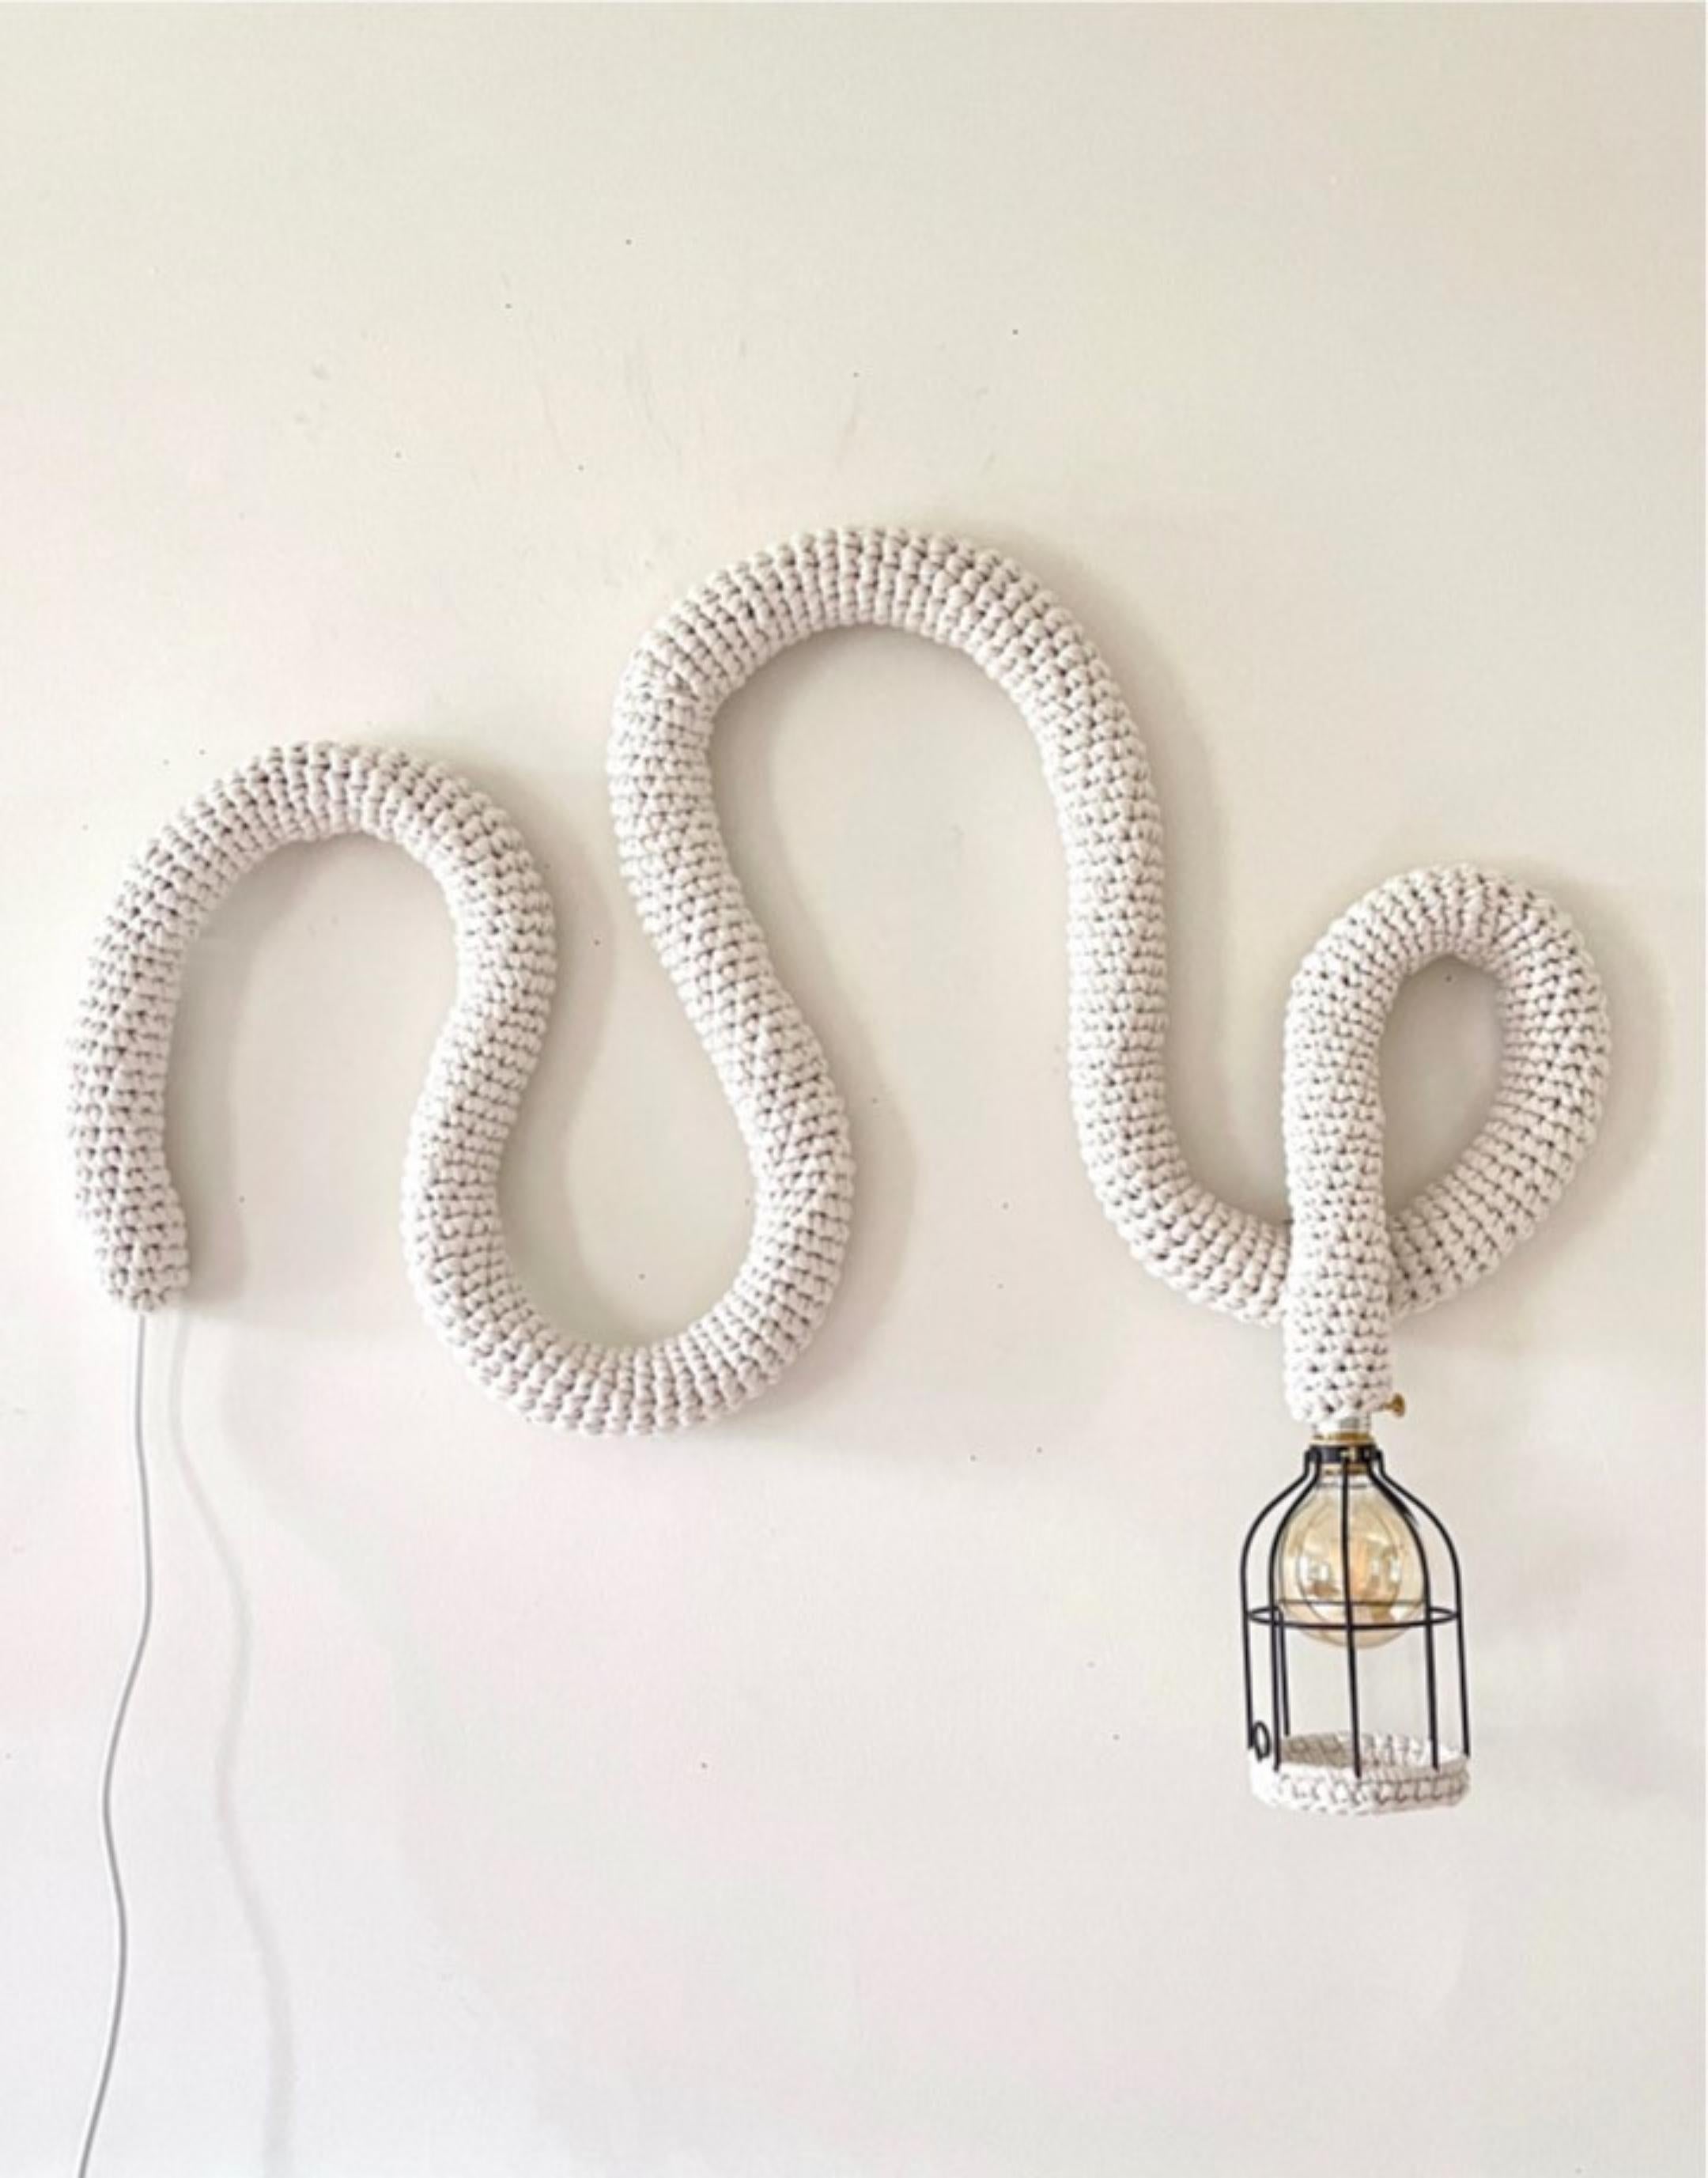 Ropes No. 7 Wall Sculpture by Meg Morrison
Dimensions: W 97 x D 10 x H 79 cm (approximate measurements)
Materials: Yarn, other

The yarn used in my ropes is reclaimed from textile mill remnants. All pieces are hand stitched from sustainable